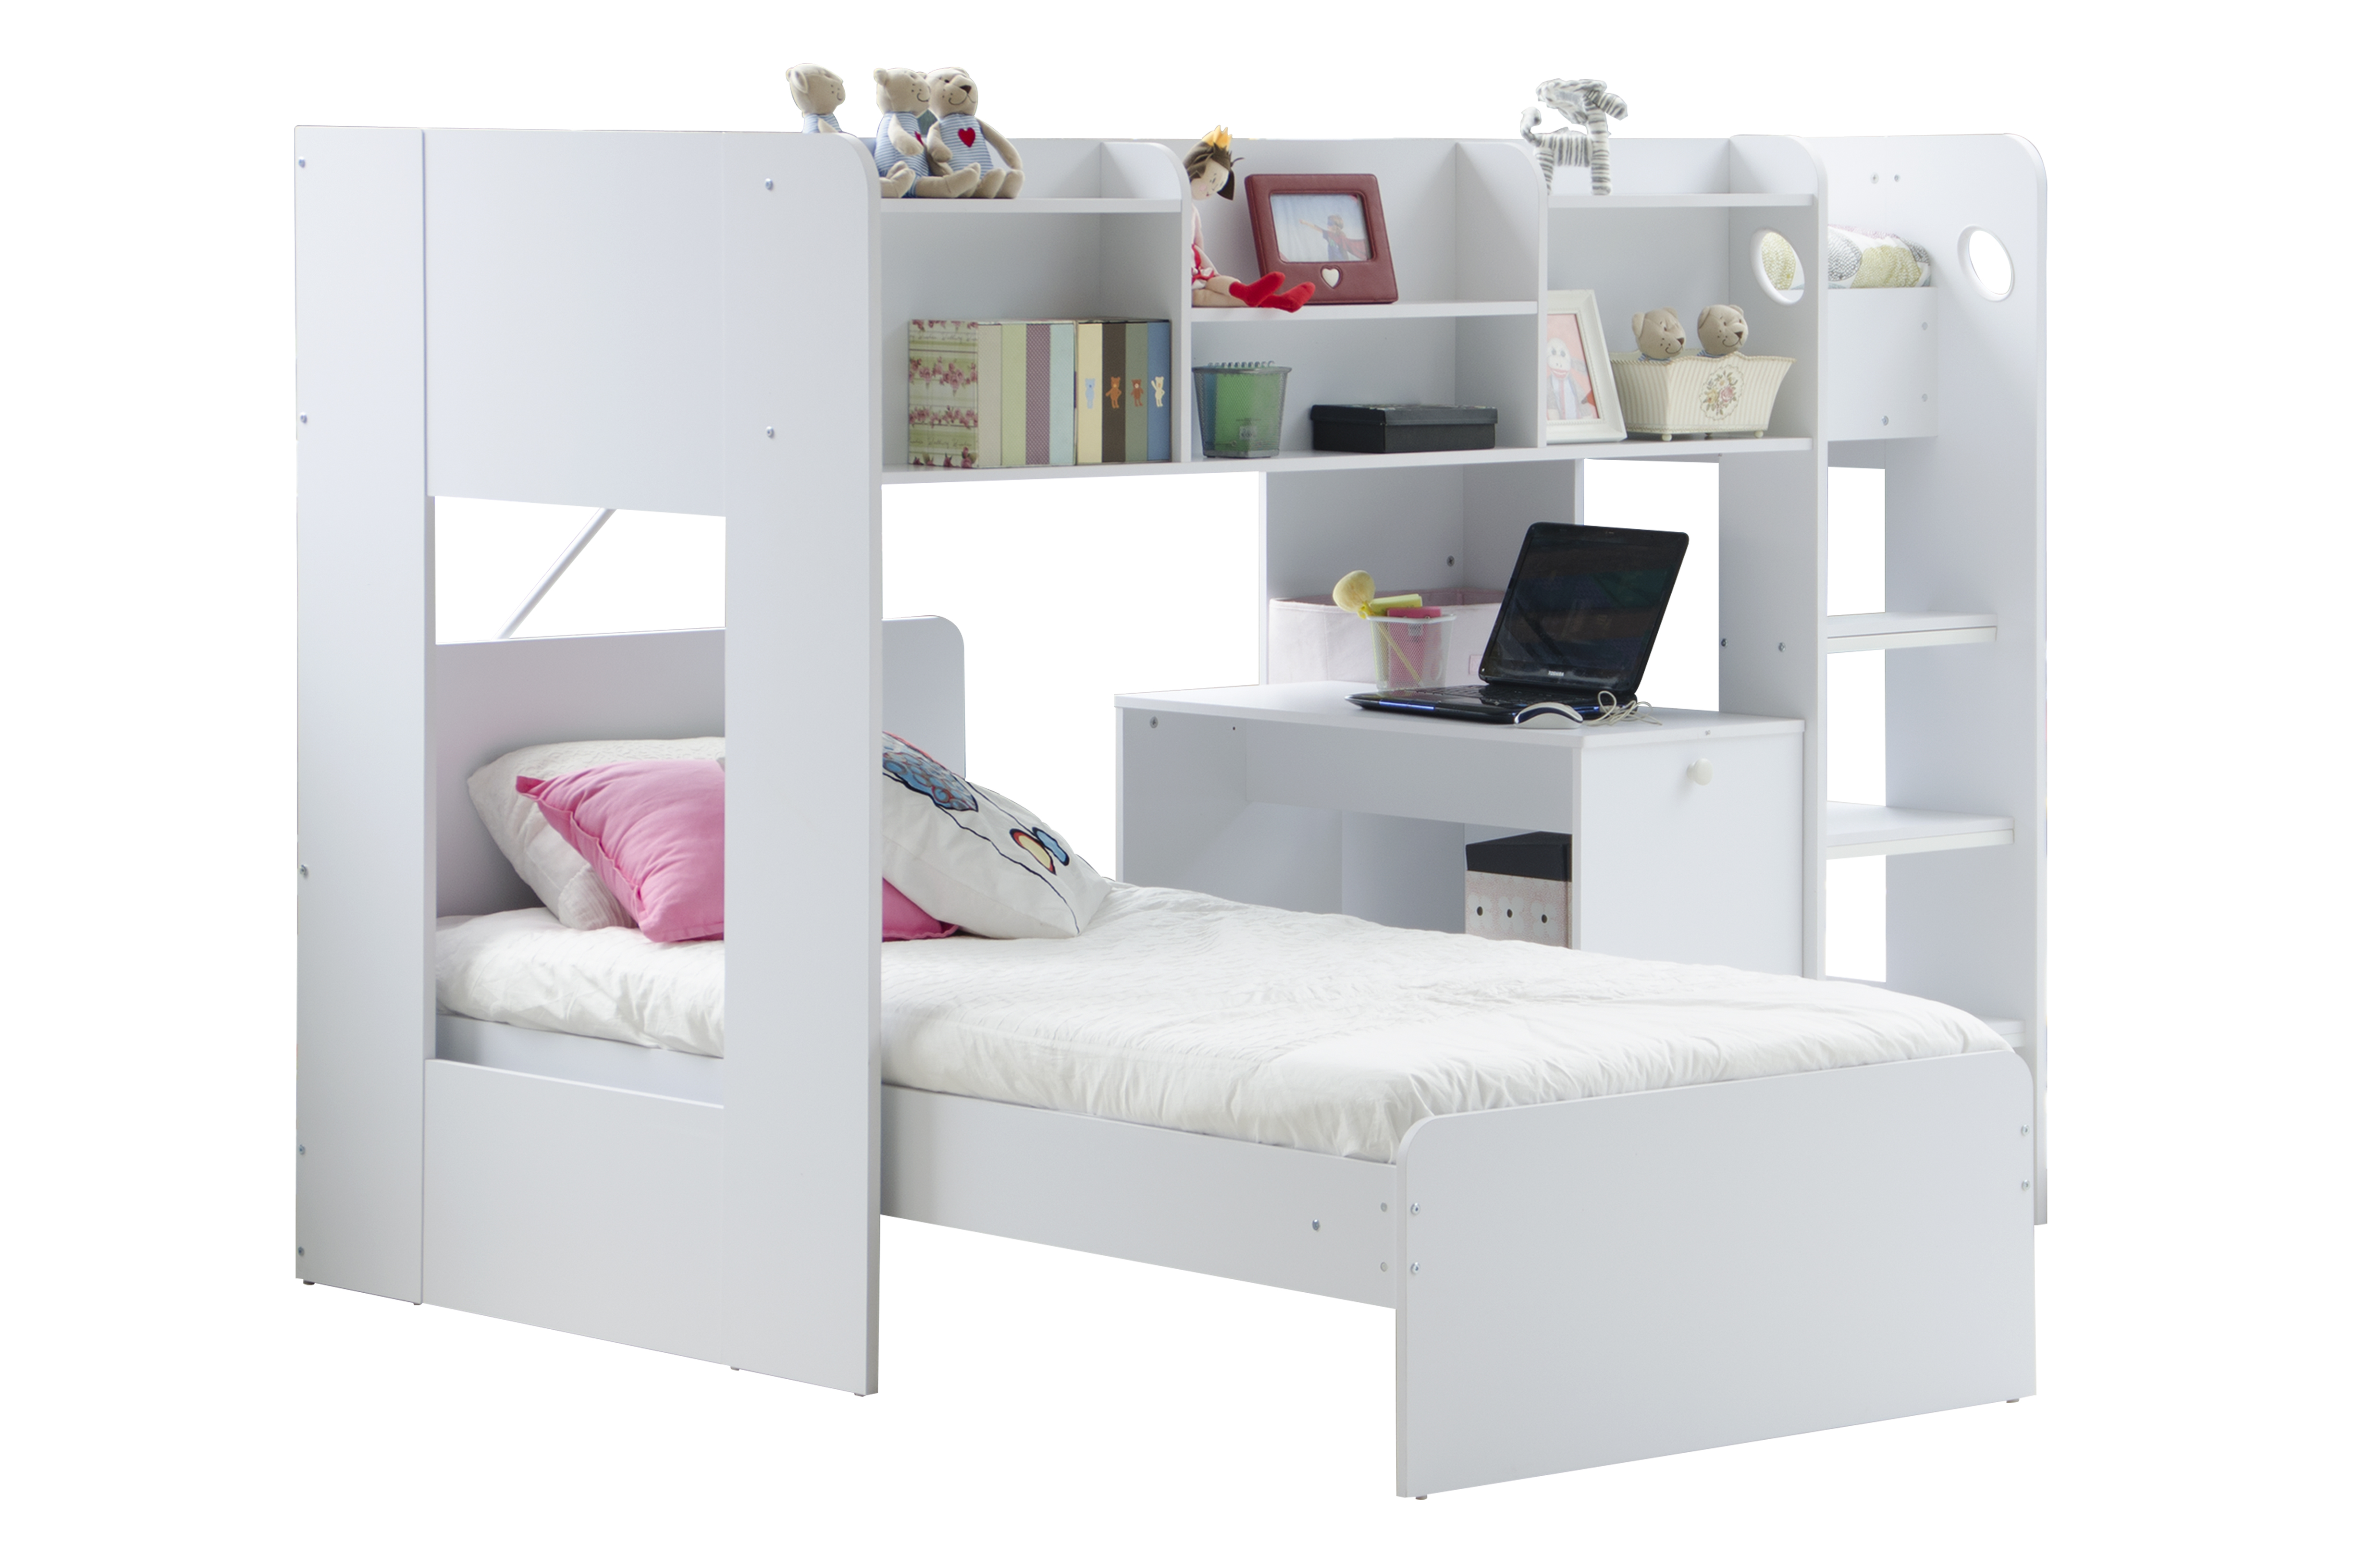 Flair Furnishings Wizard Junior 'L' Shaped Bunk Bed